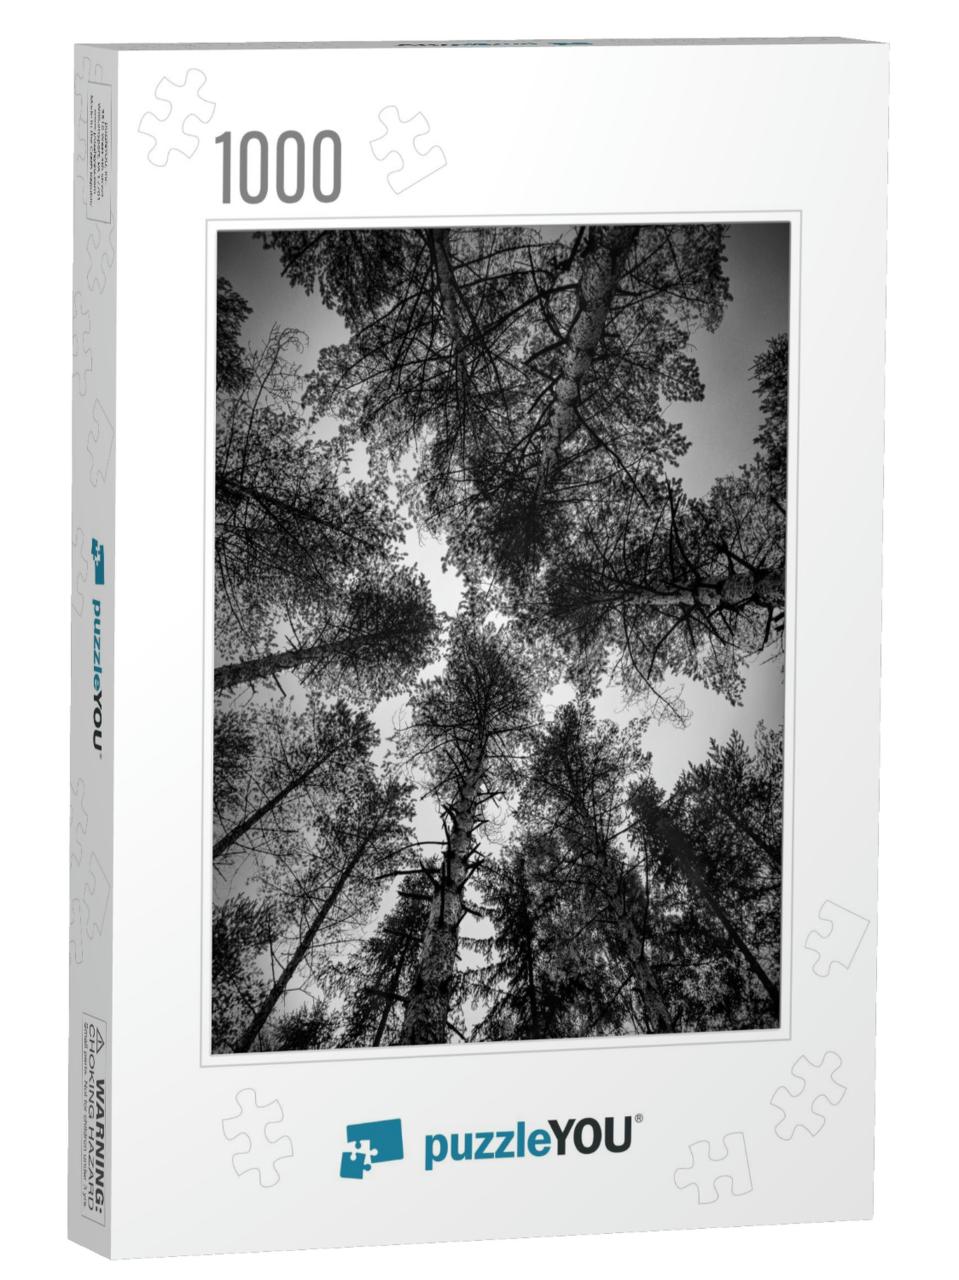 Fine Art, Black & White Landscape Images with Lonely Tree... Jigsaw Puzzle with 1000 pieces